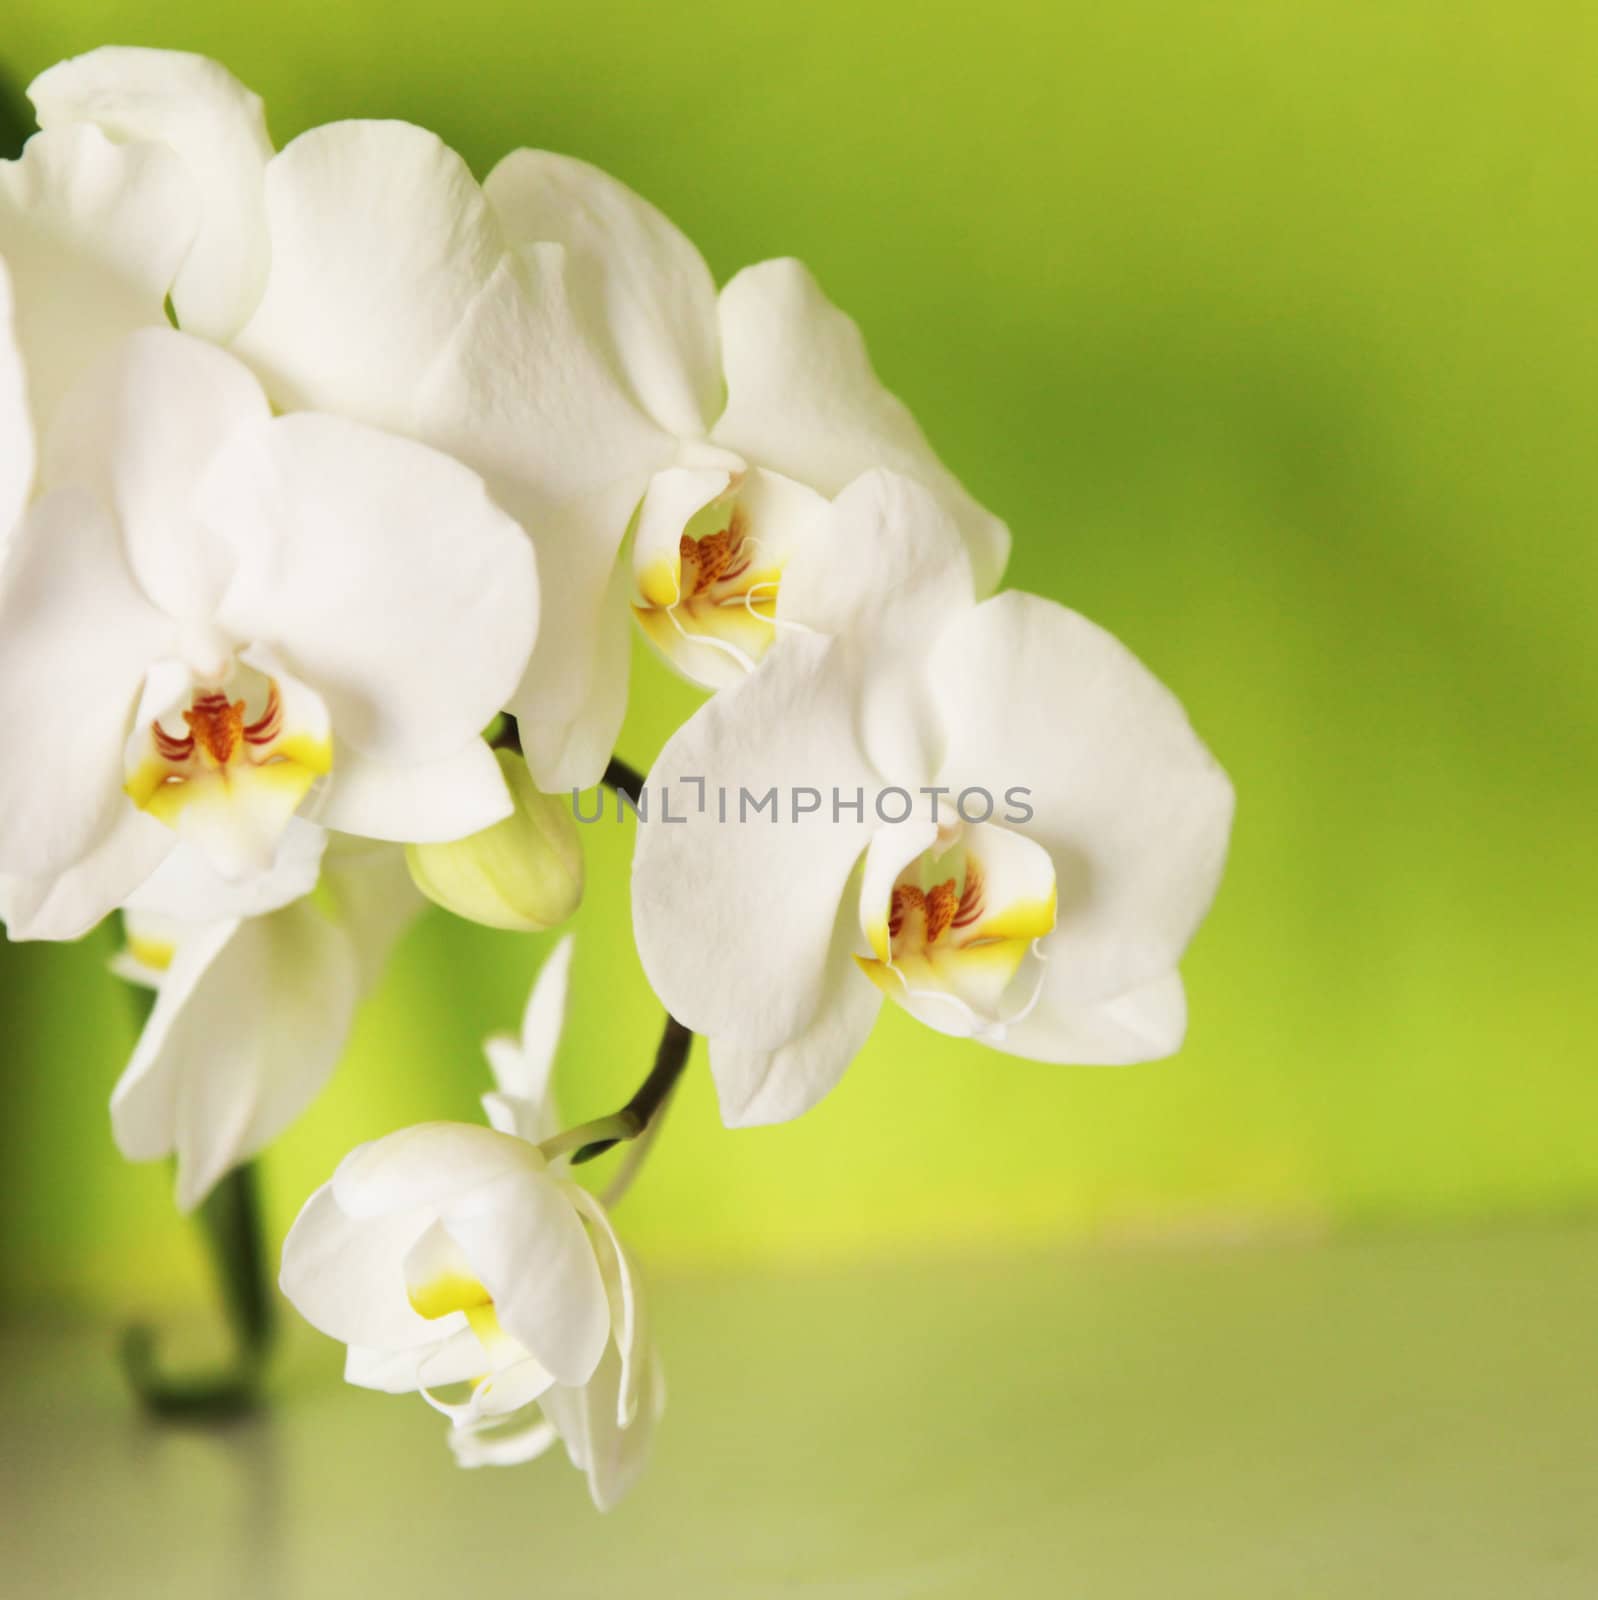  Orchid on a green background  by Farina6000